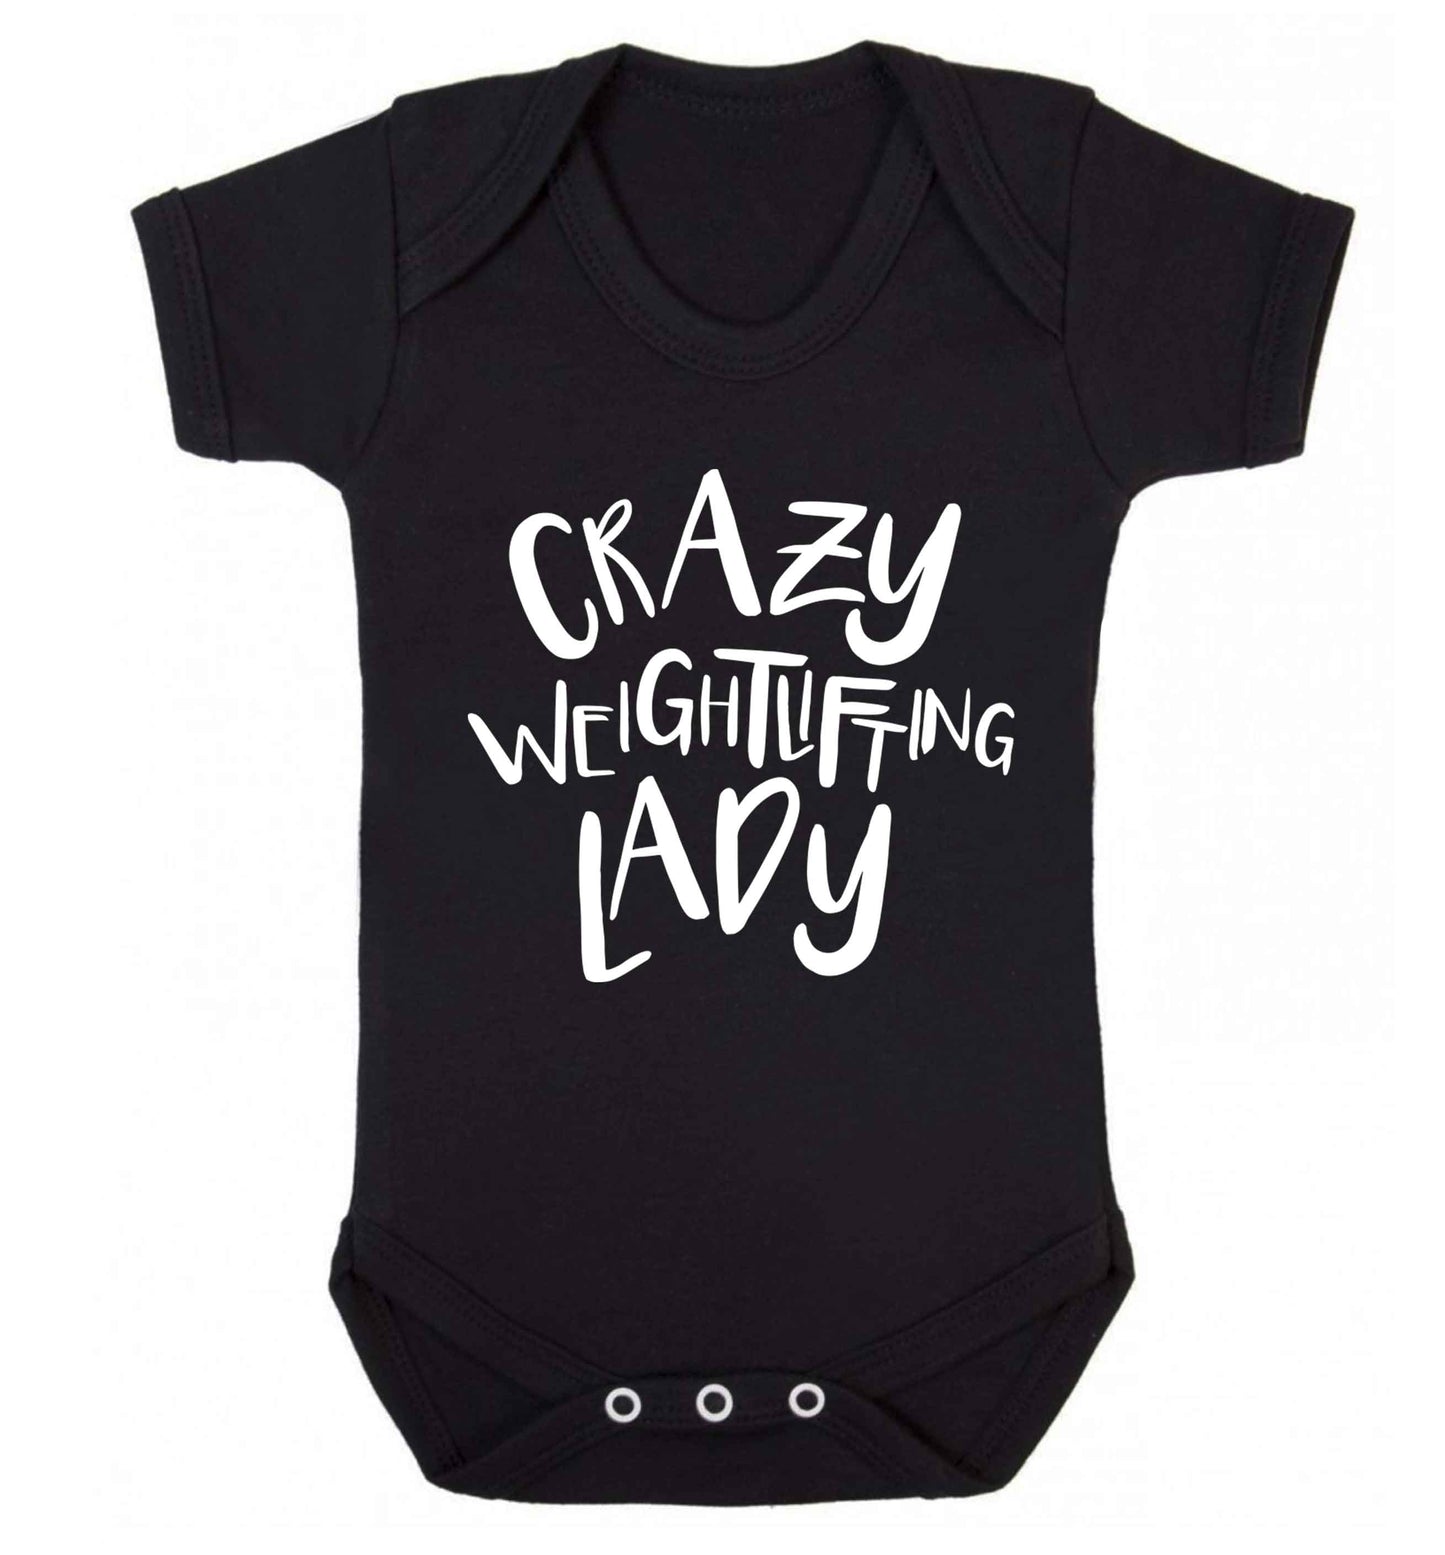 Crazy weightlifting lady Baby Vest black 18-24 months